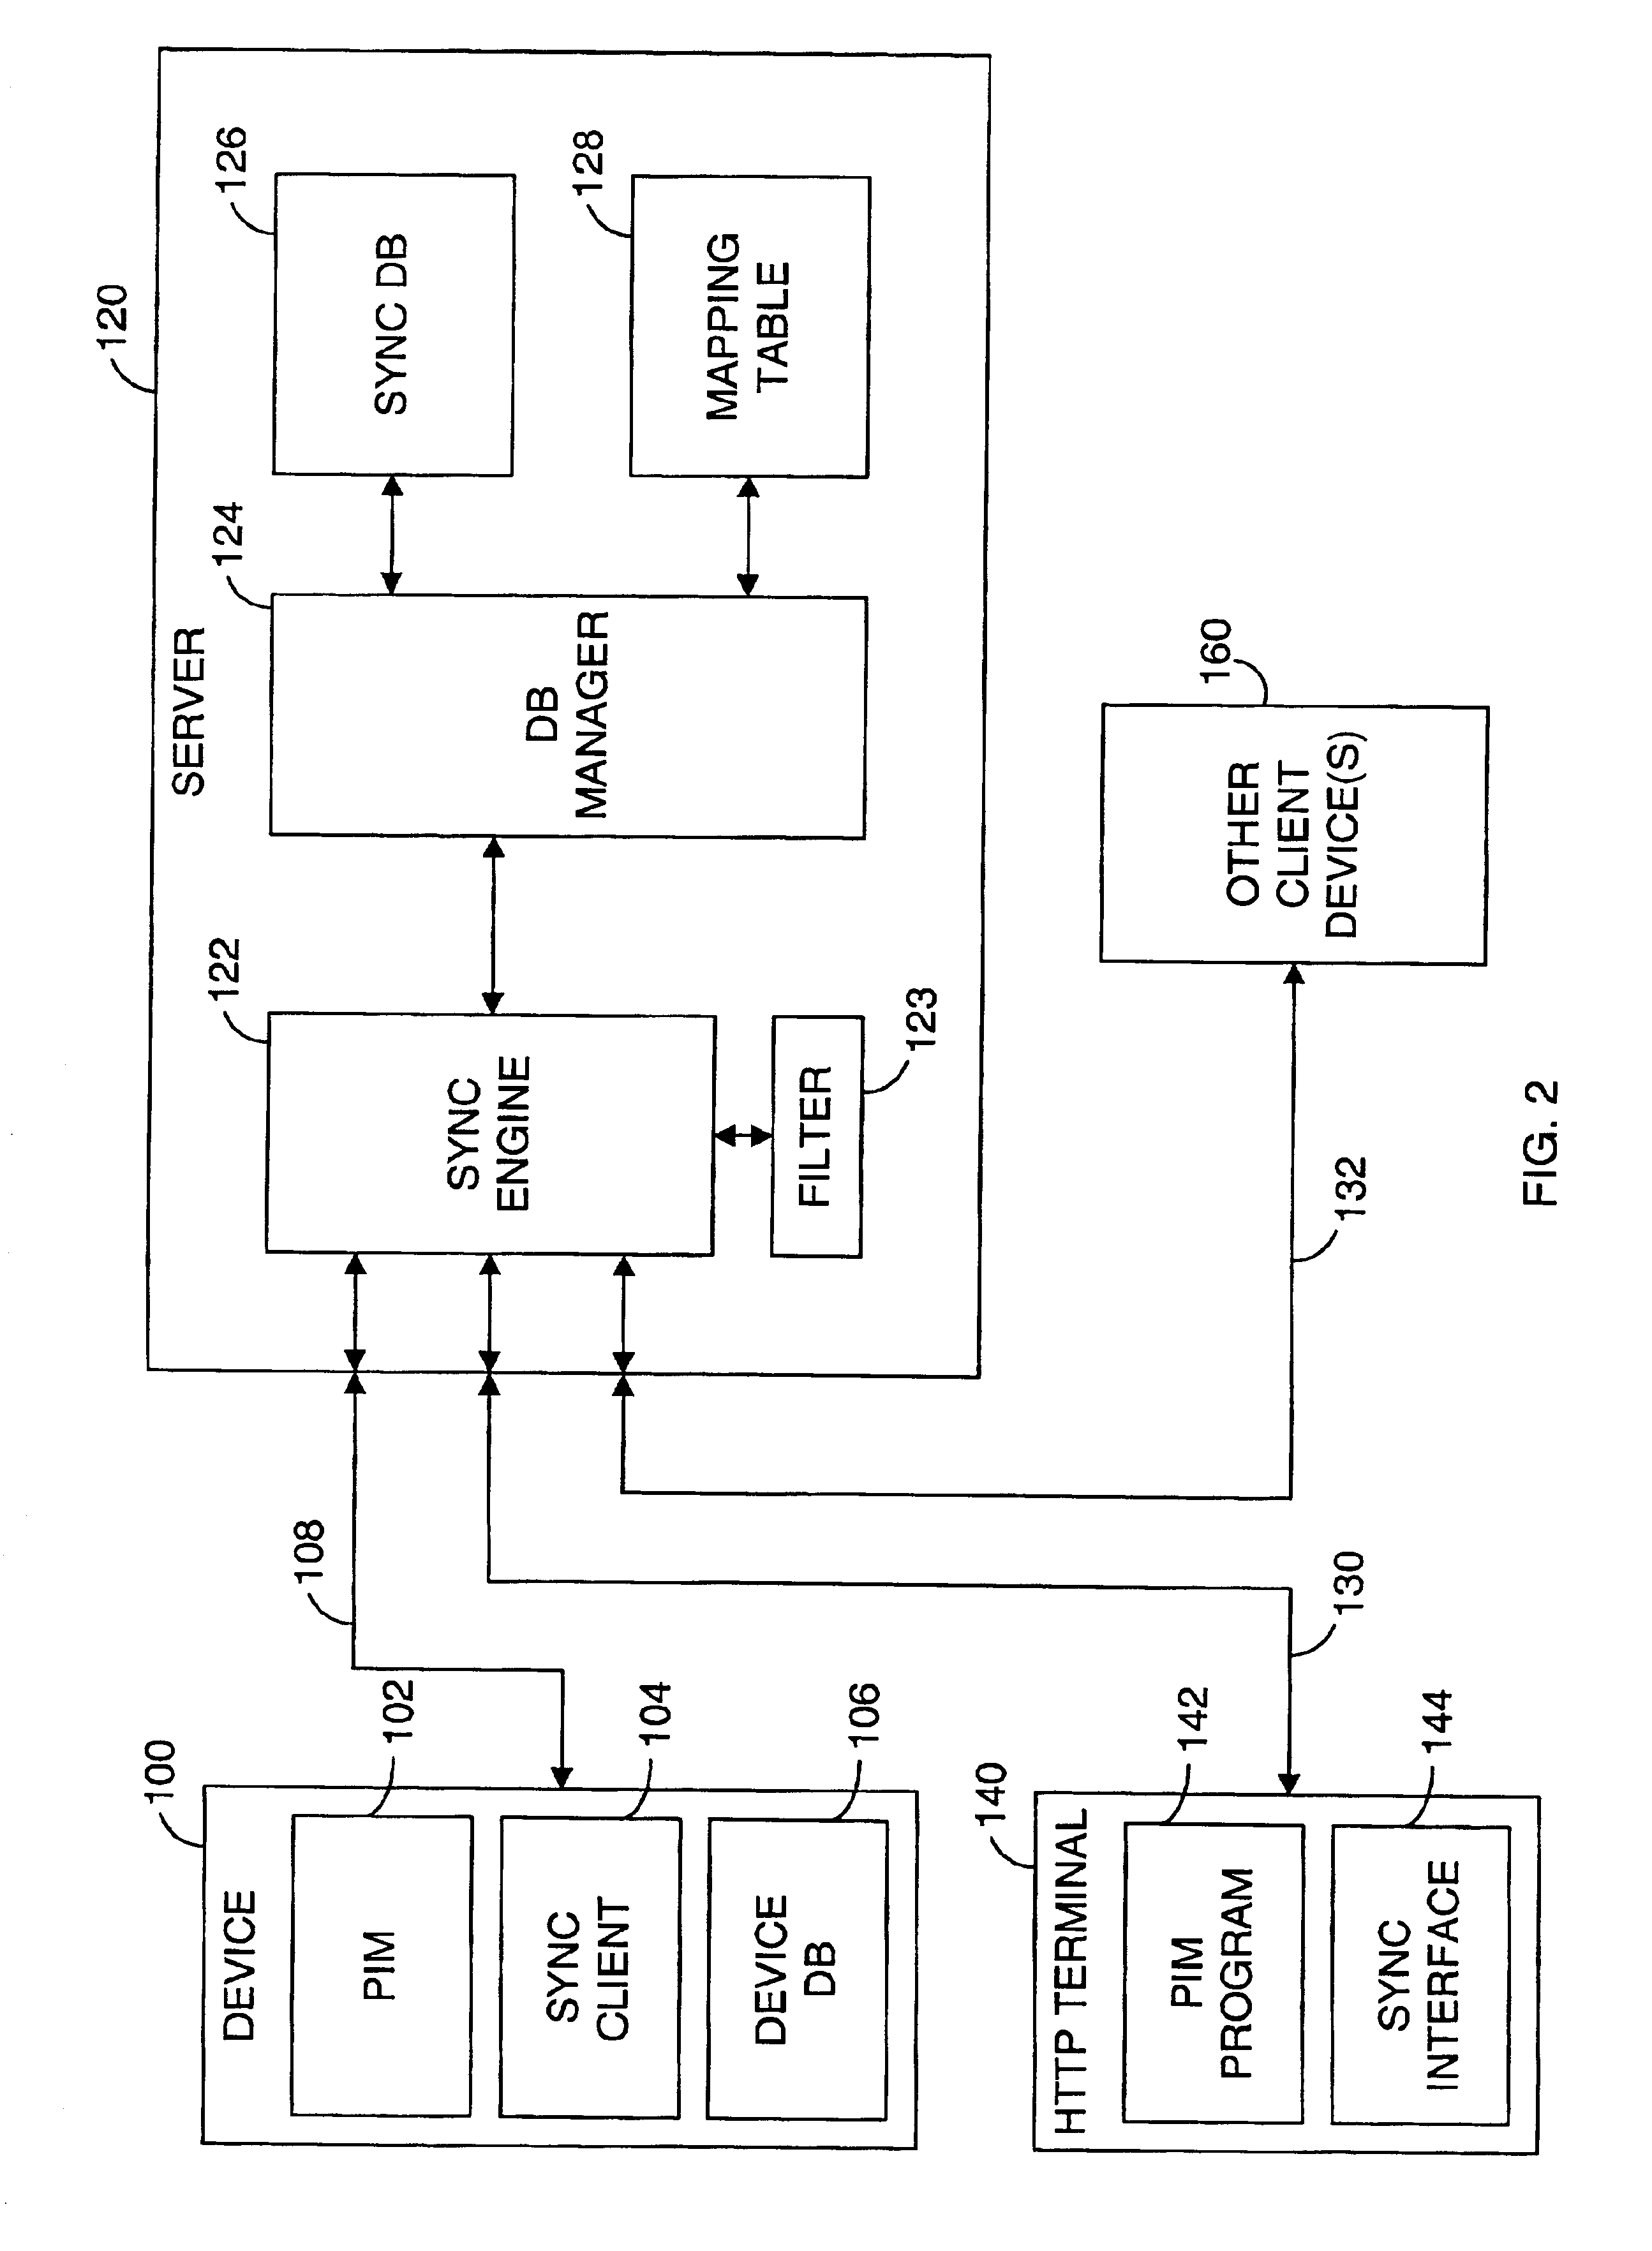 Method and system for implementing a filter in a data synchronization system